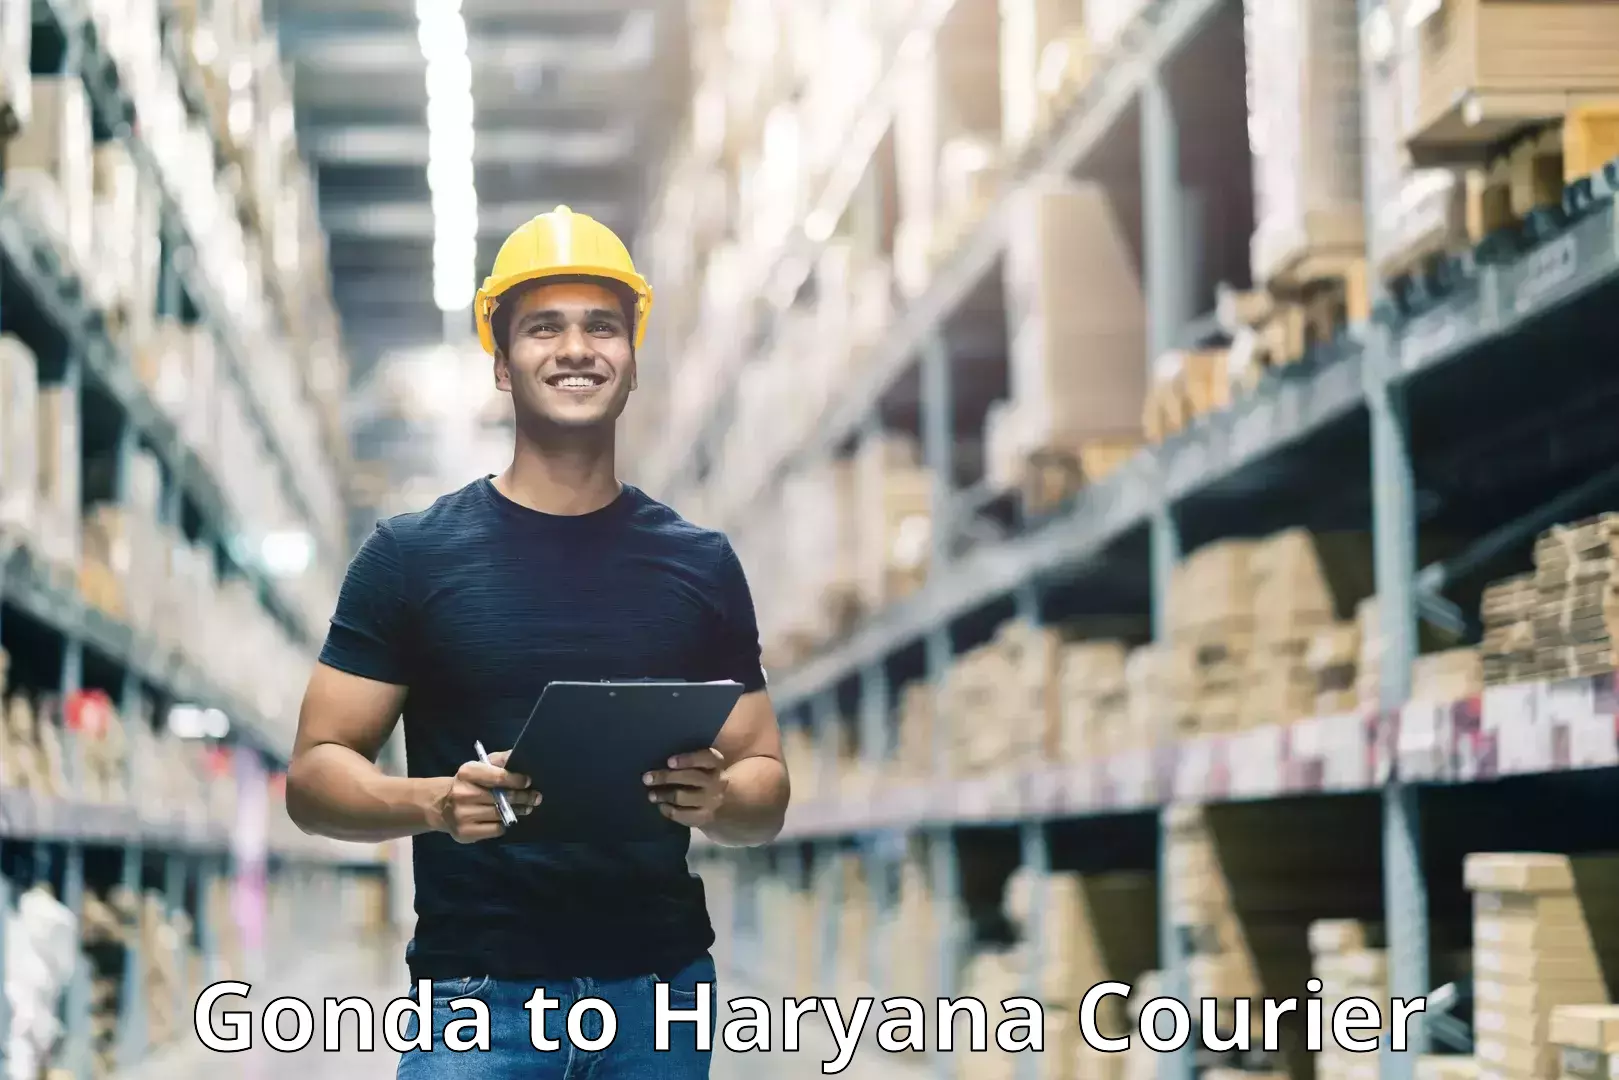 Professional courier handling Gonda to Sirsa